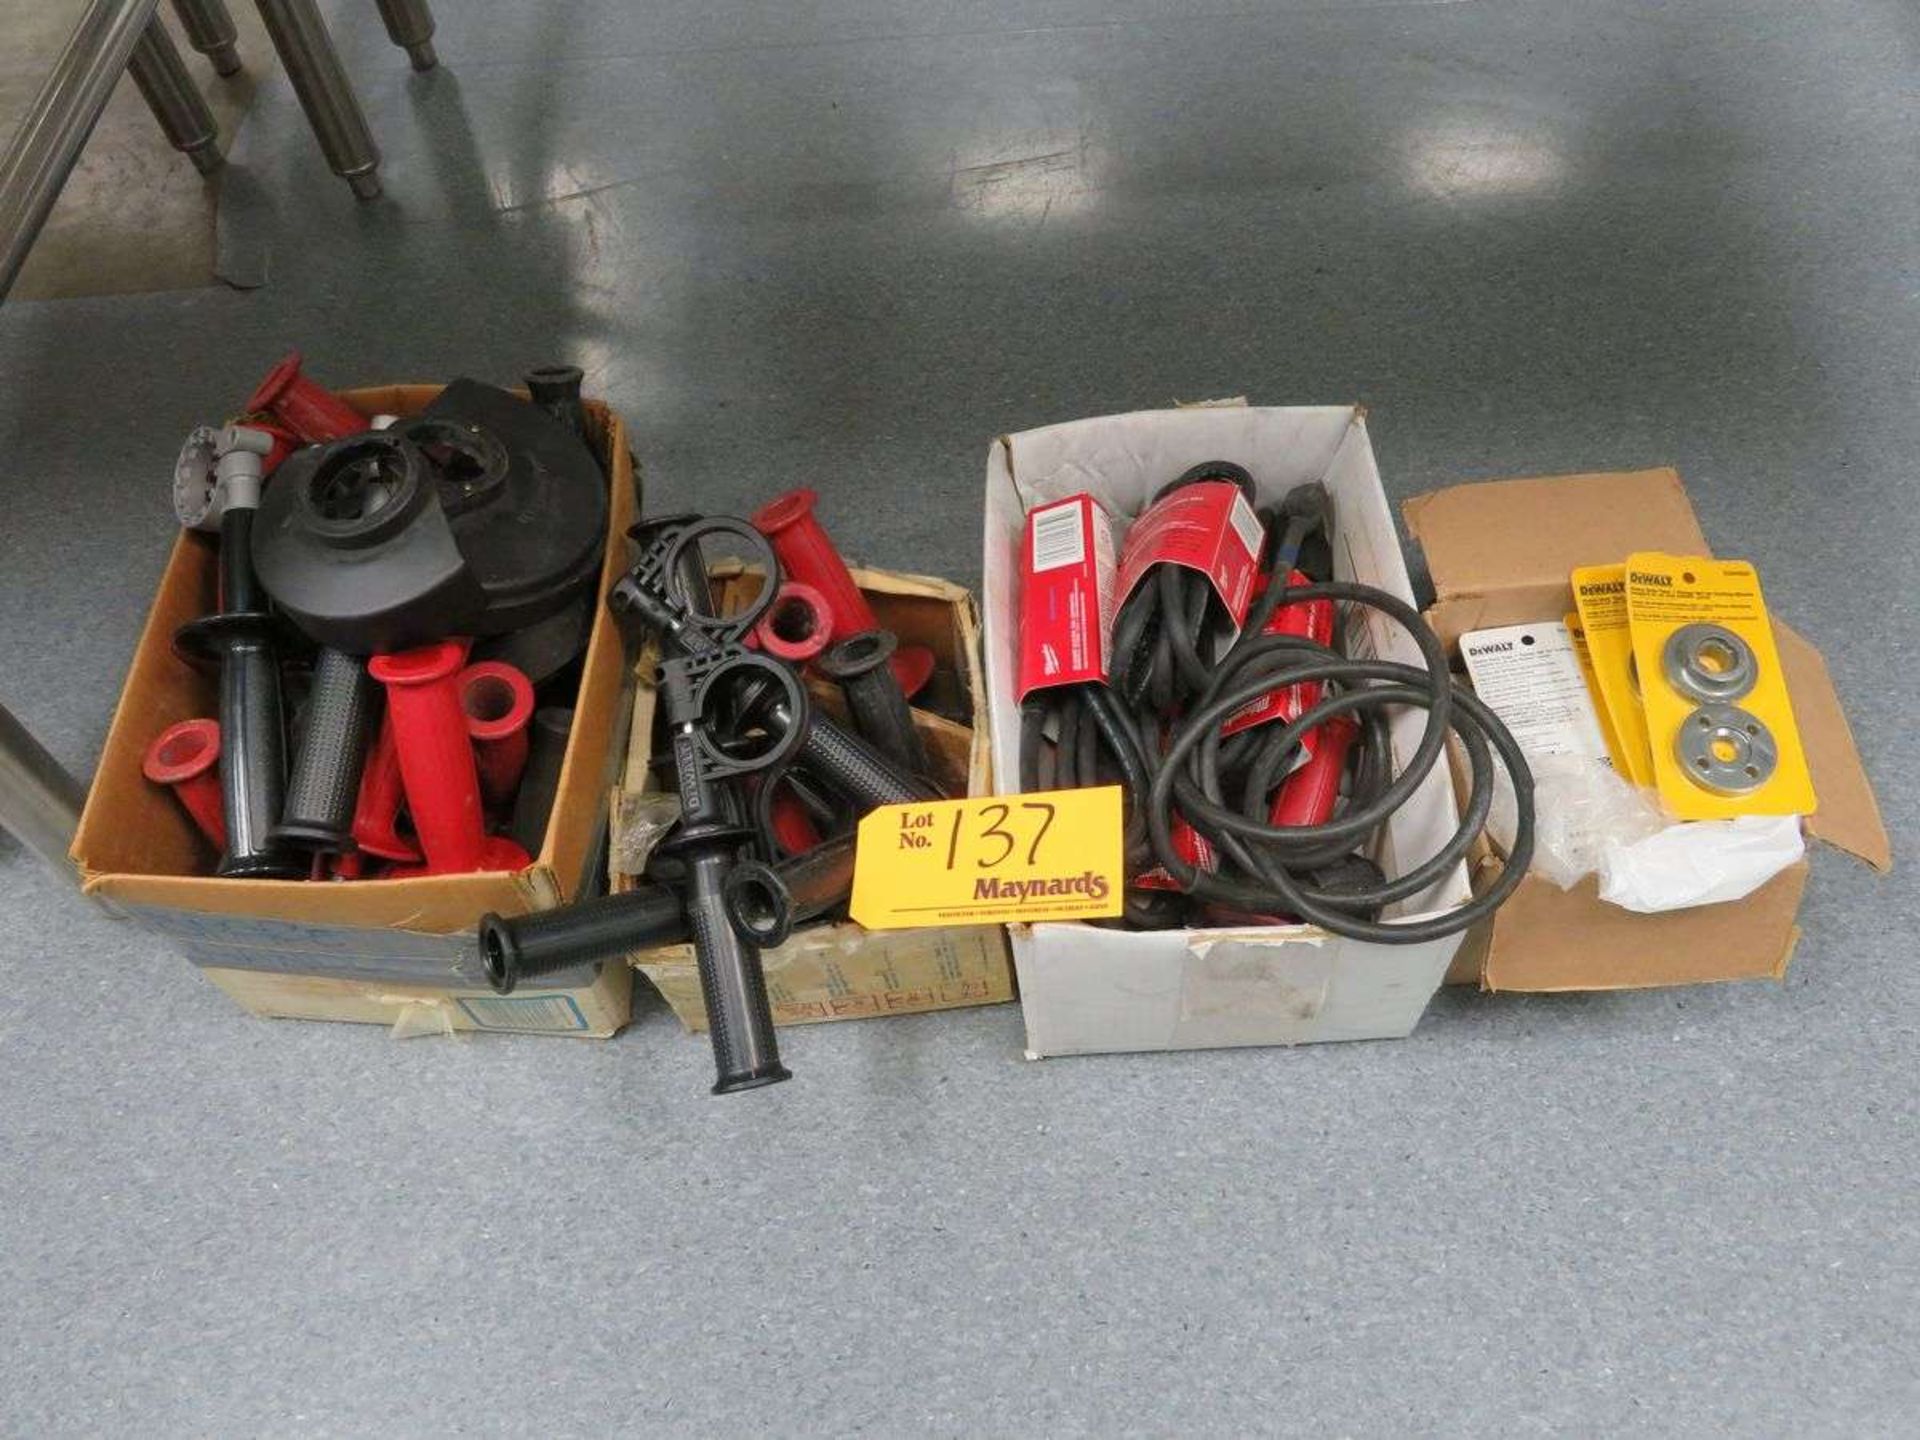 Assorted Power Tool Accessories